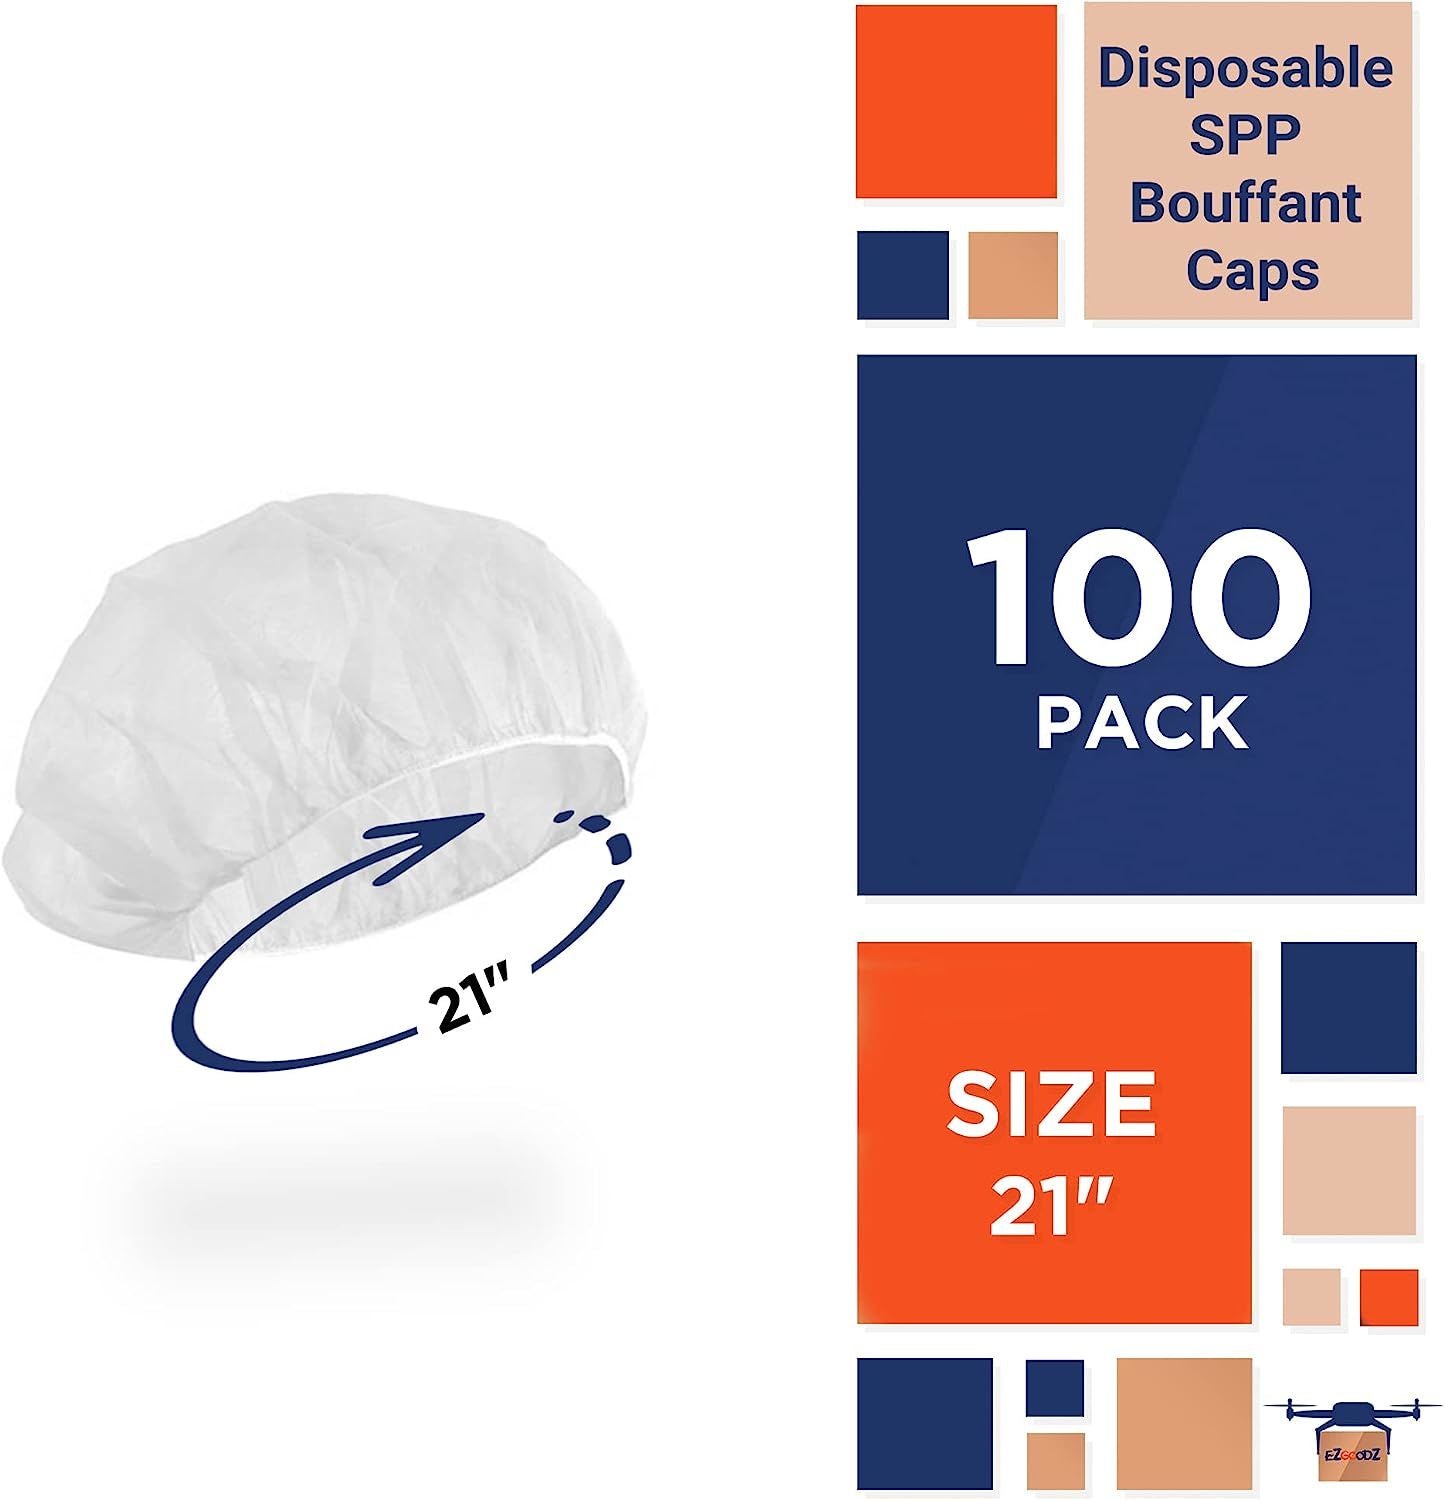 Disposable Hair Caps for Nurses 30''; Pack of 100 White Bouffant Caps Disposable with Elastic Edge; Polypropylene Bouffant Hair Nets; Hairnets for Women Food Service; Cleaning Industry